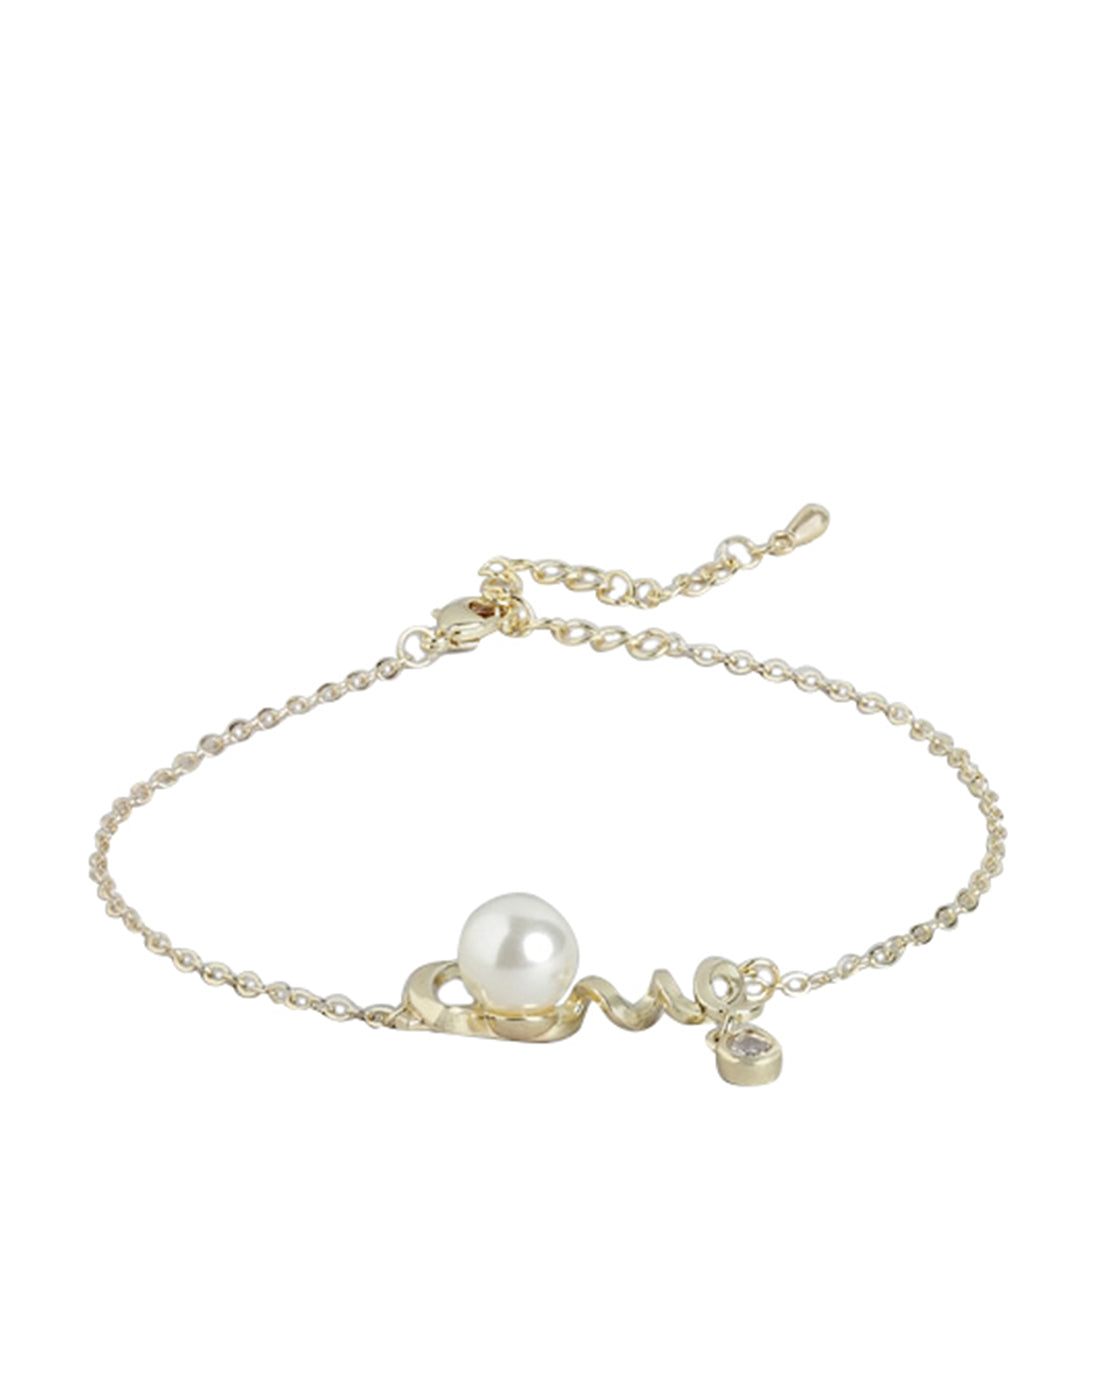 Gold Plated With Pearl And Texture Adjustable Charm Bracelet For Women